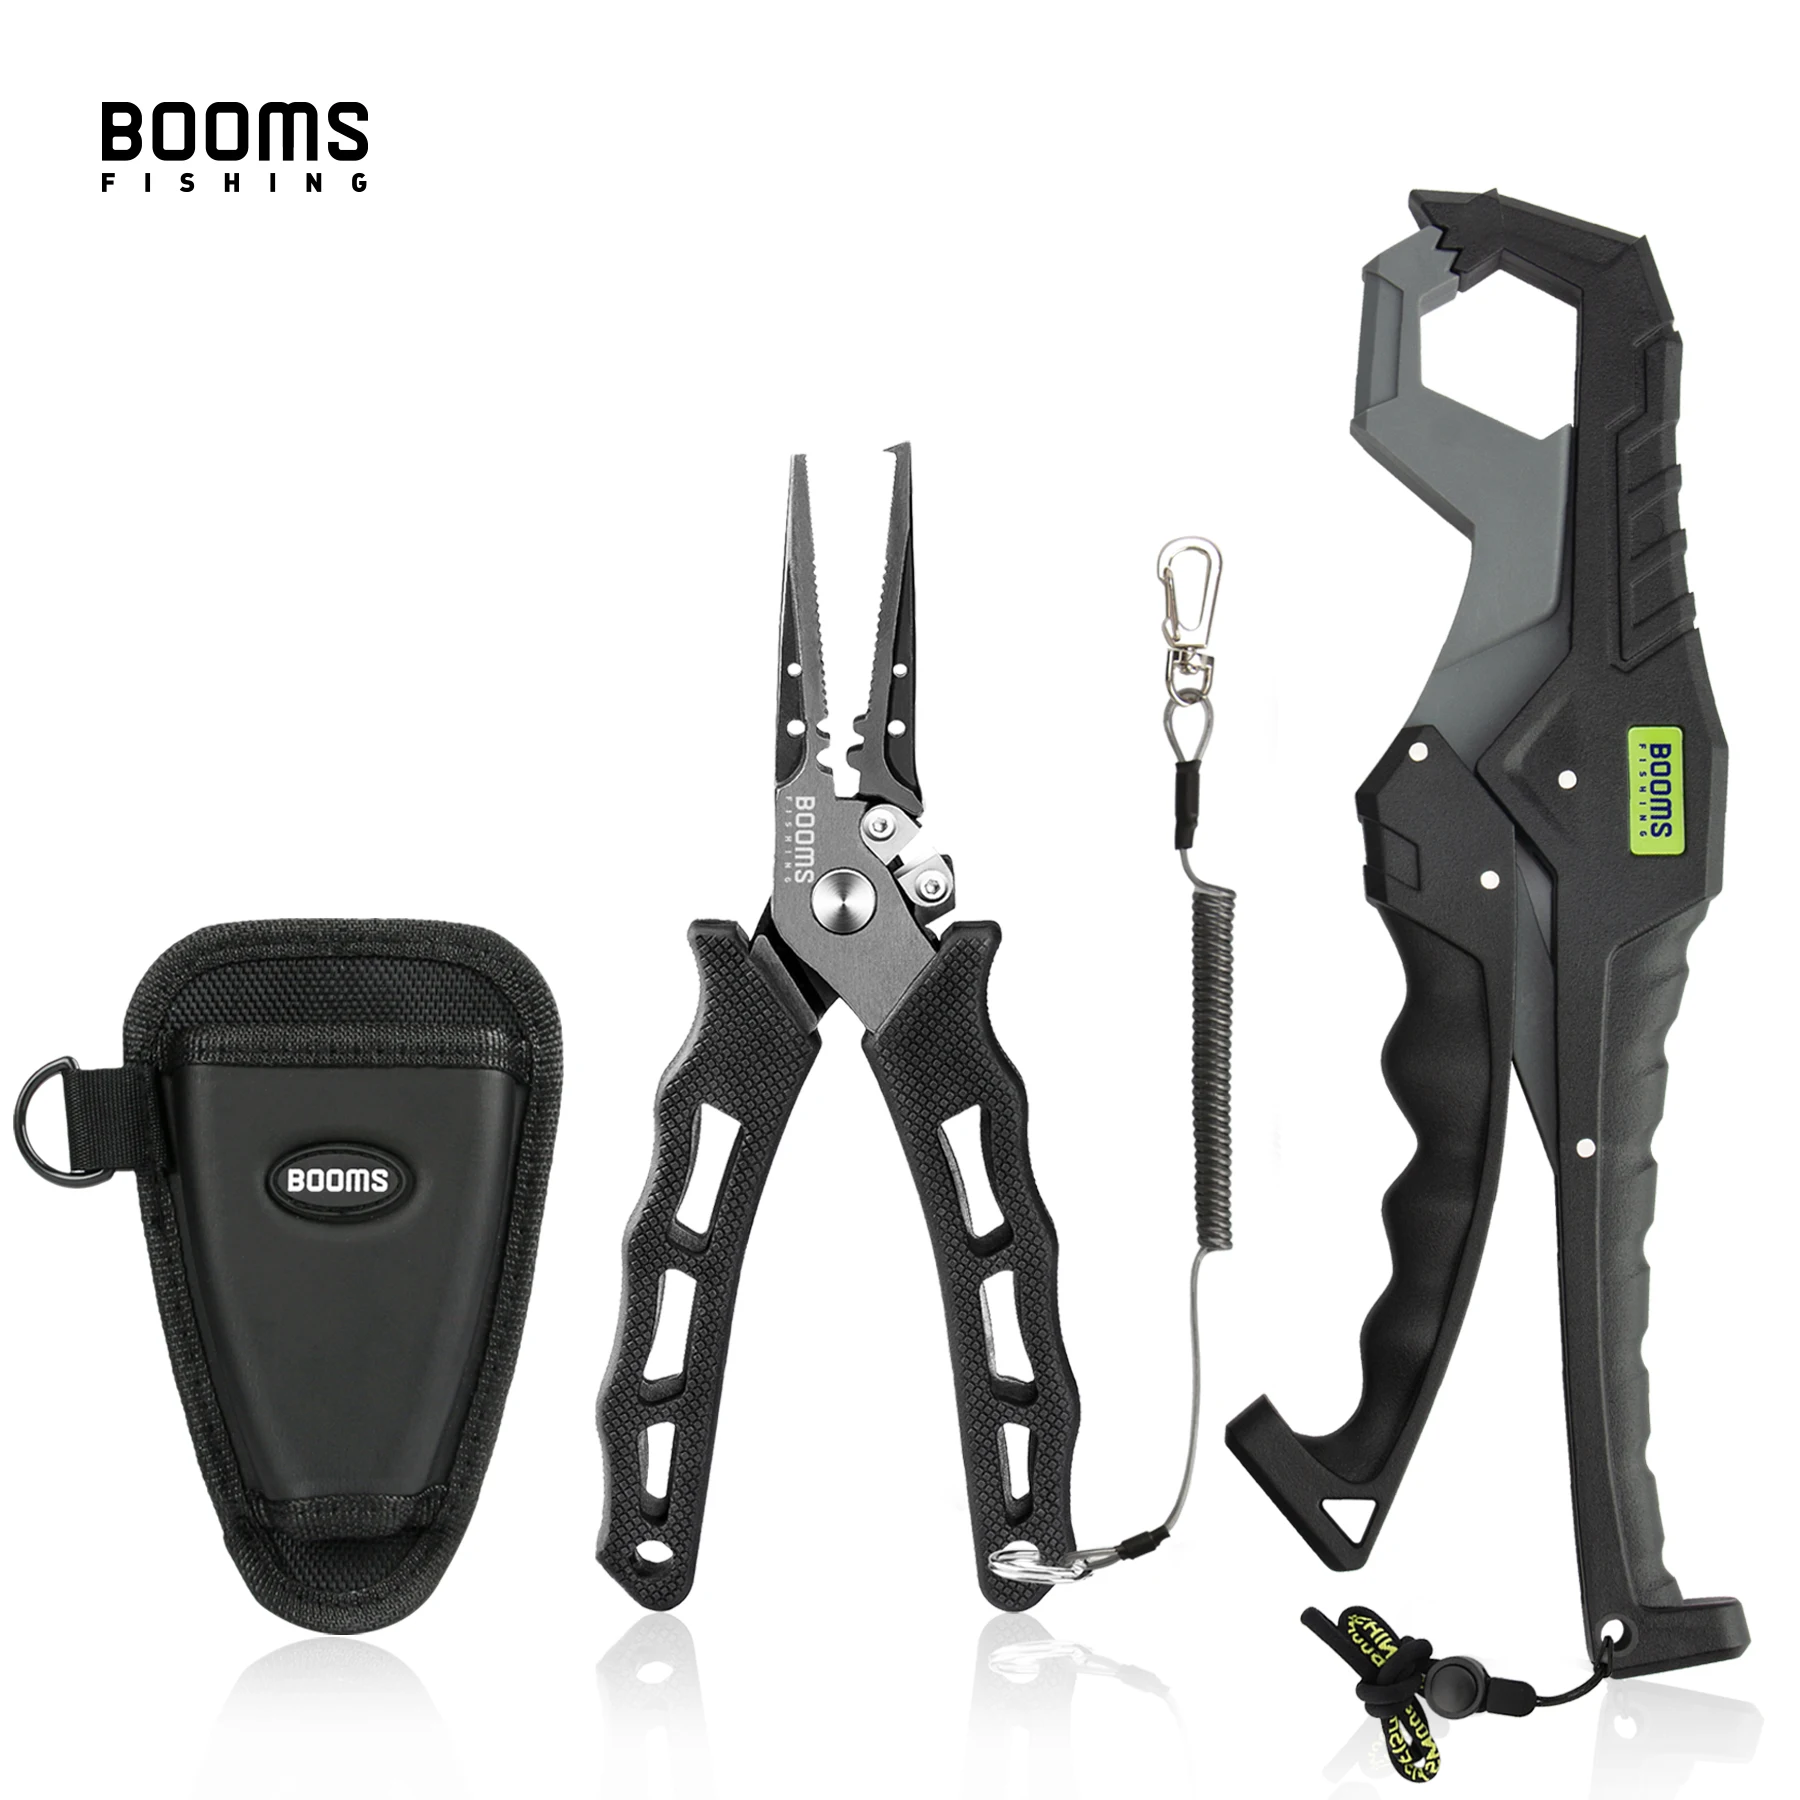 Booms Fishing G5F7 Fishing Pliers and Fish Gripper Compose Tools Set with Lanyard Sheath Anti-Rust Anti-Corrosion Safer For Fish